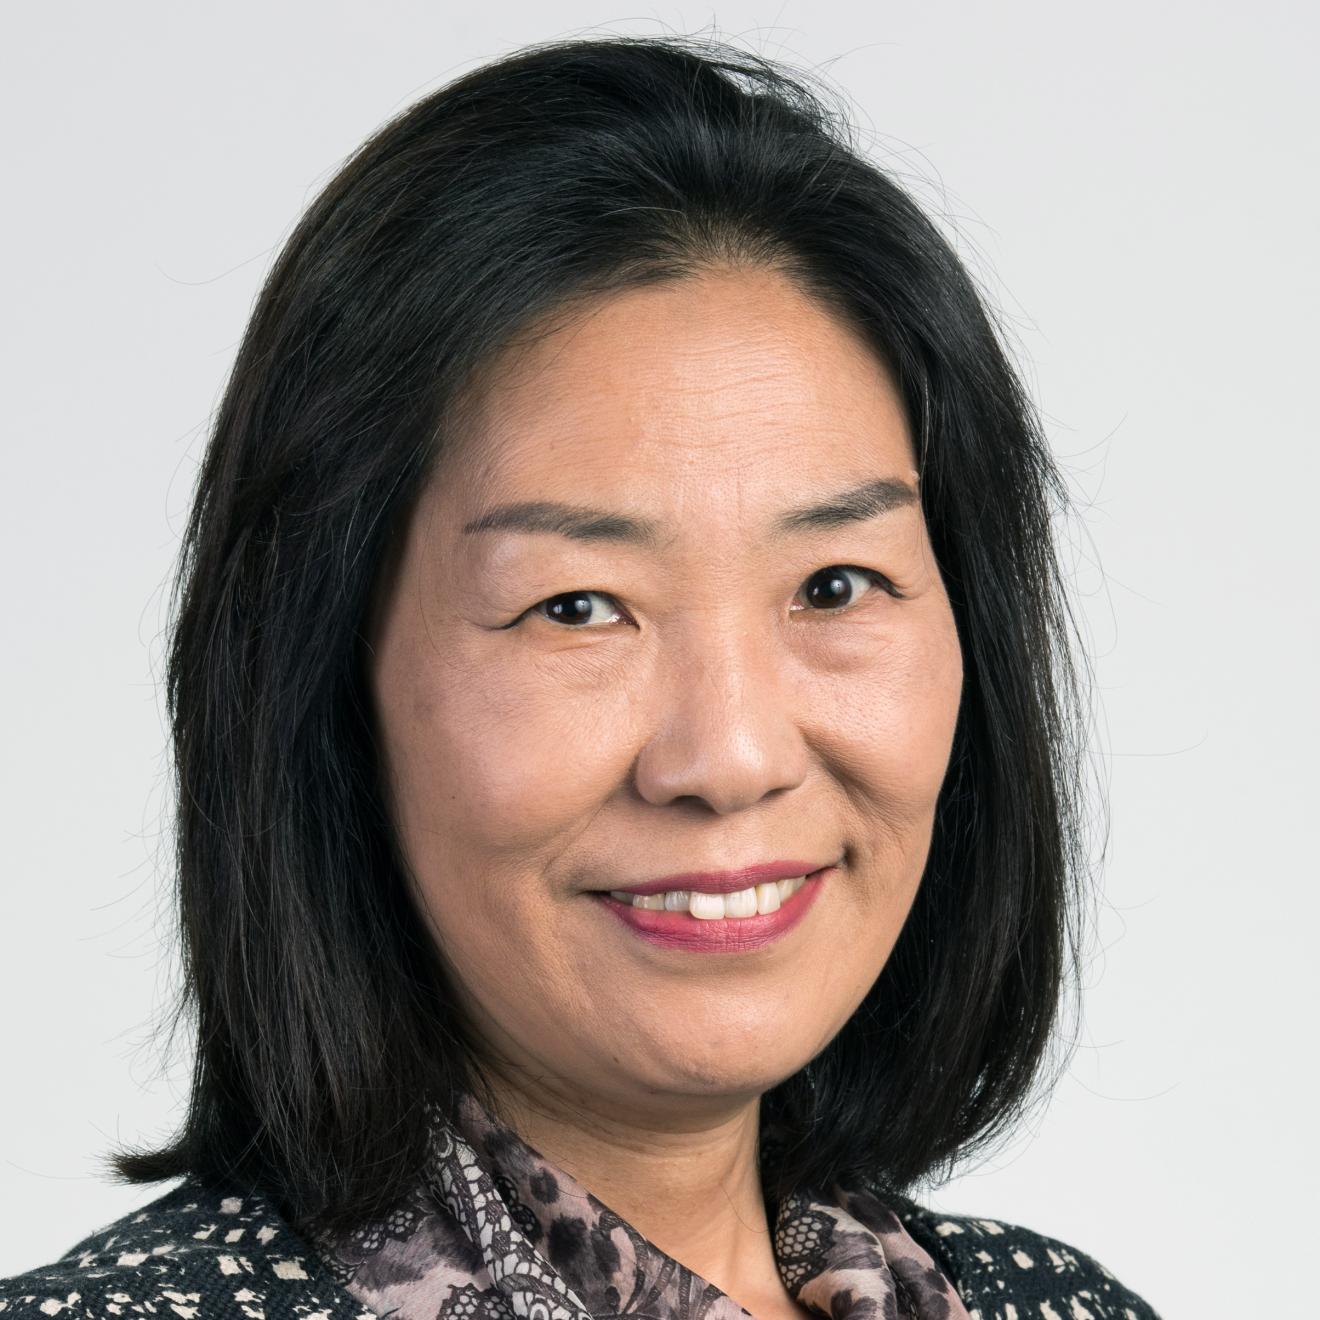 Dr Kyeong Kang, Lecturer for the School of Professional Practice and Leadership